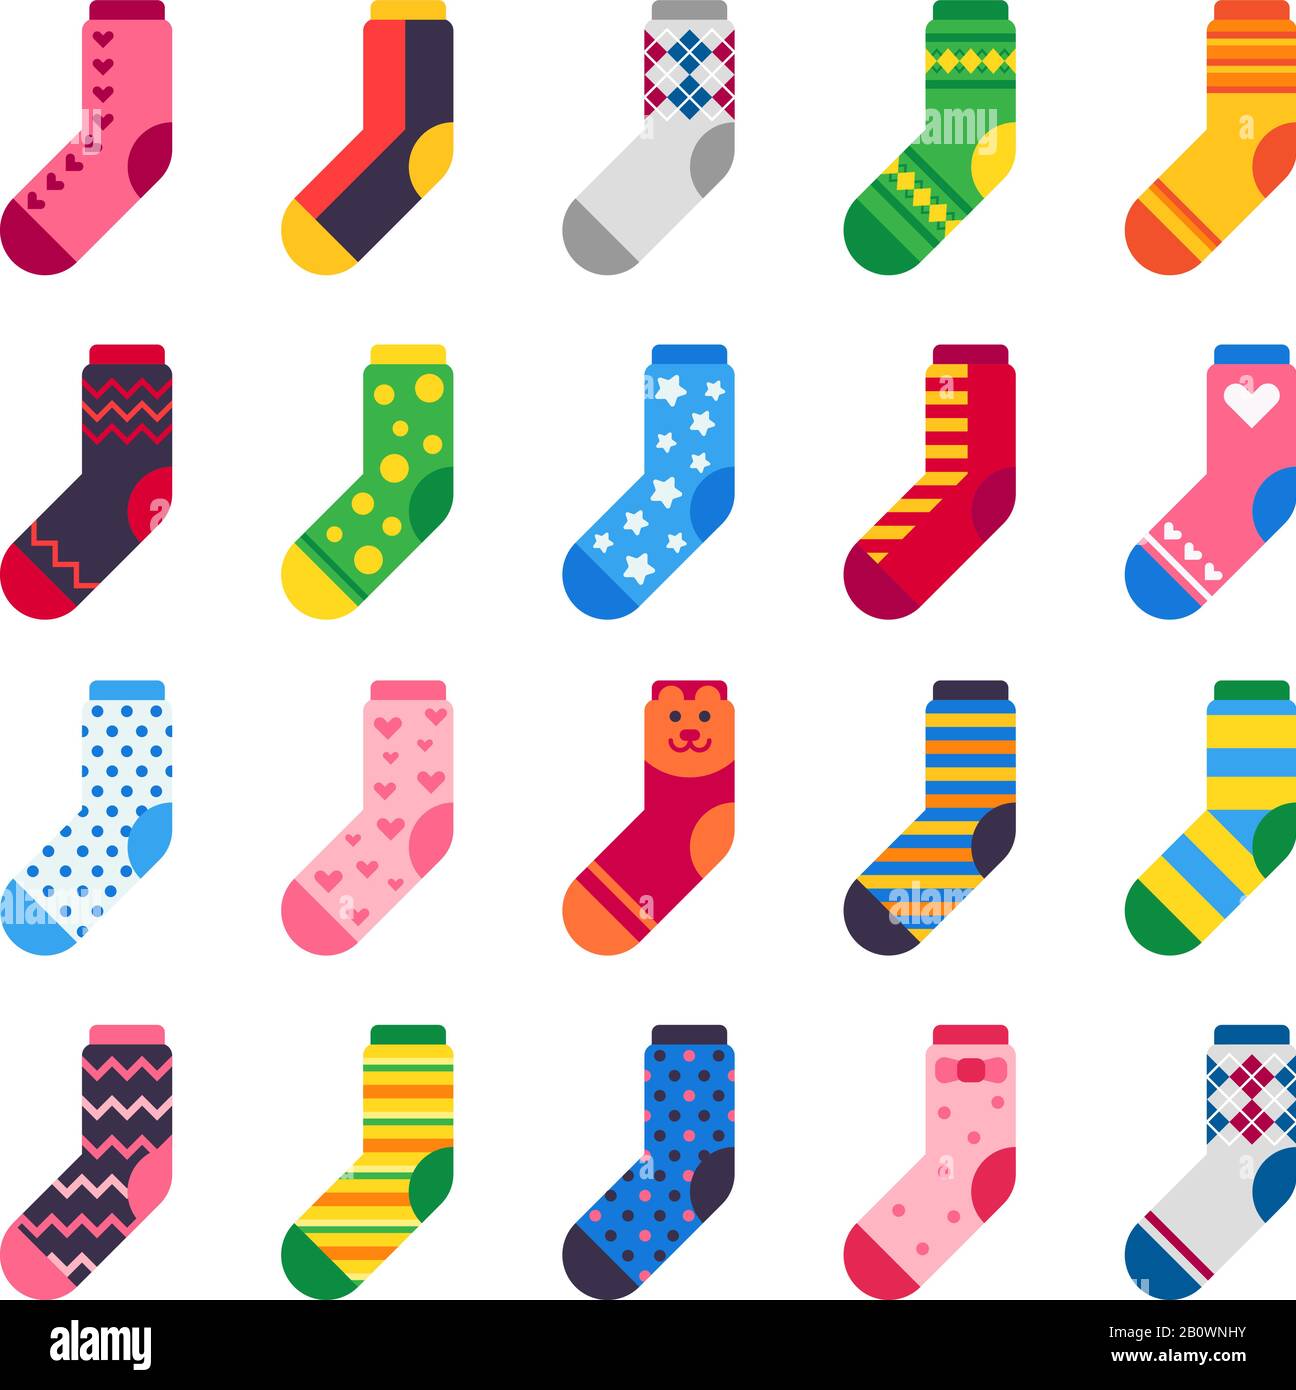 Flat socks. Long sock for child feet, elastic colorful fabric and striped warm kids ankle clothes vector icons set Stock Vector